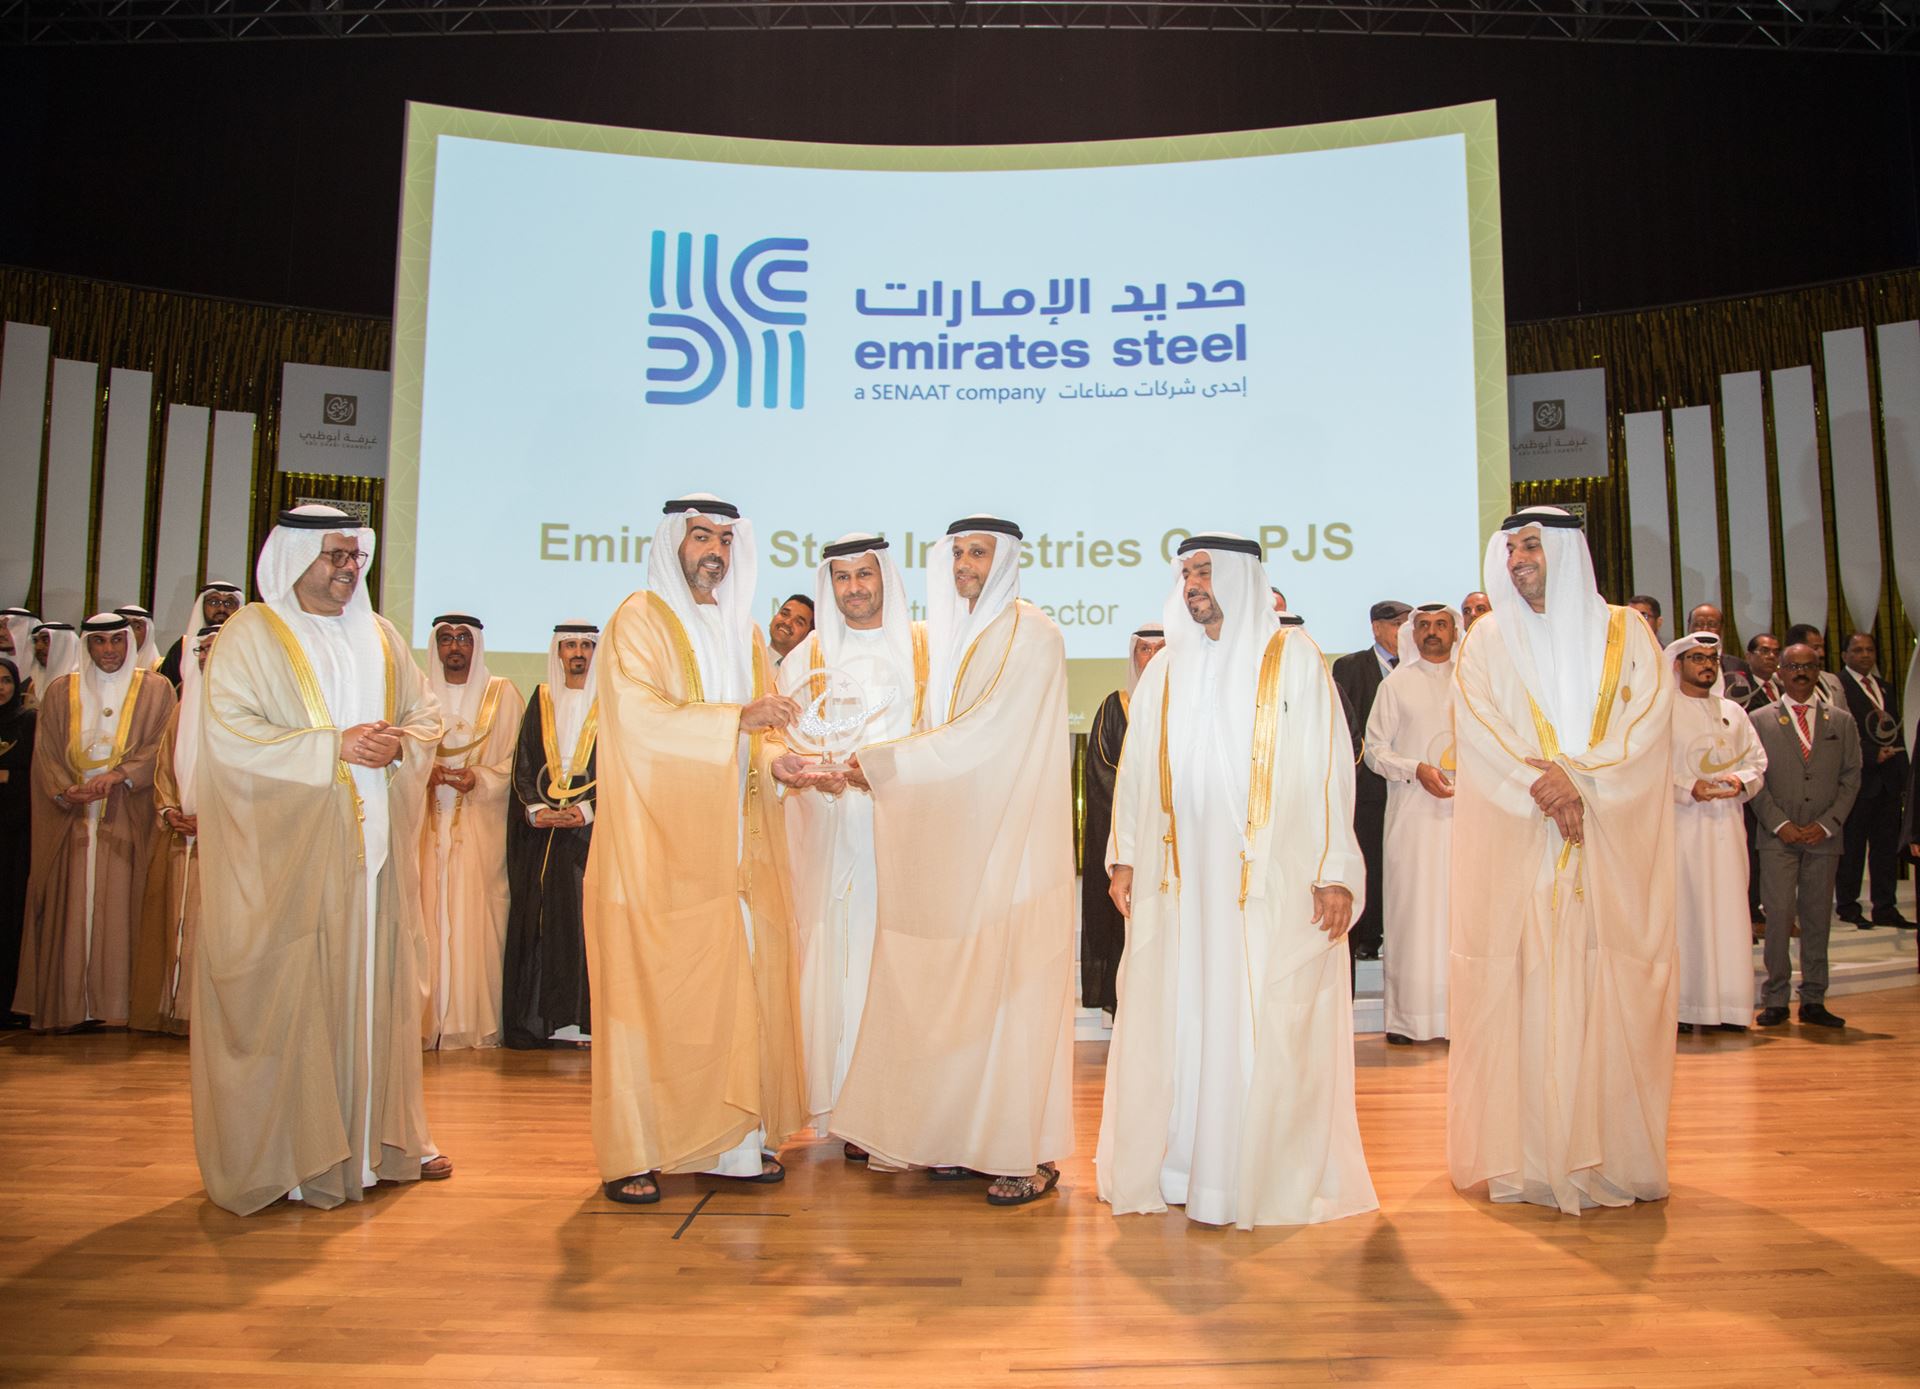 Emirates Steel Arkan Group took center stage at the 26th Middle East Iron and Steel Conference in Dubai